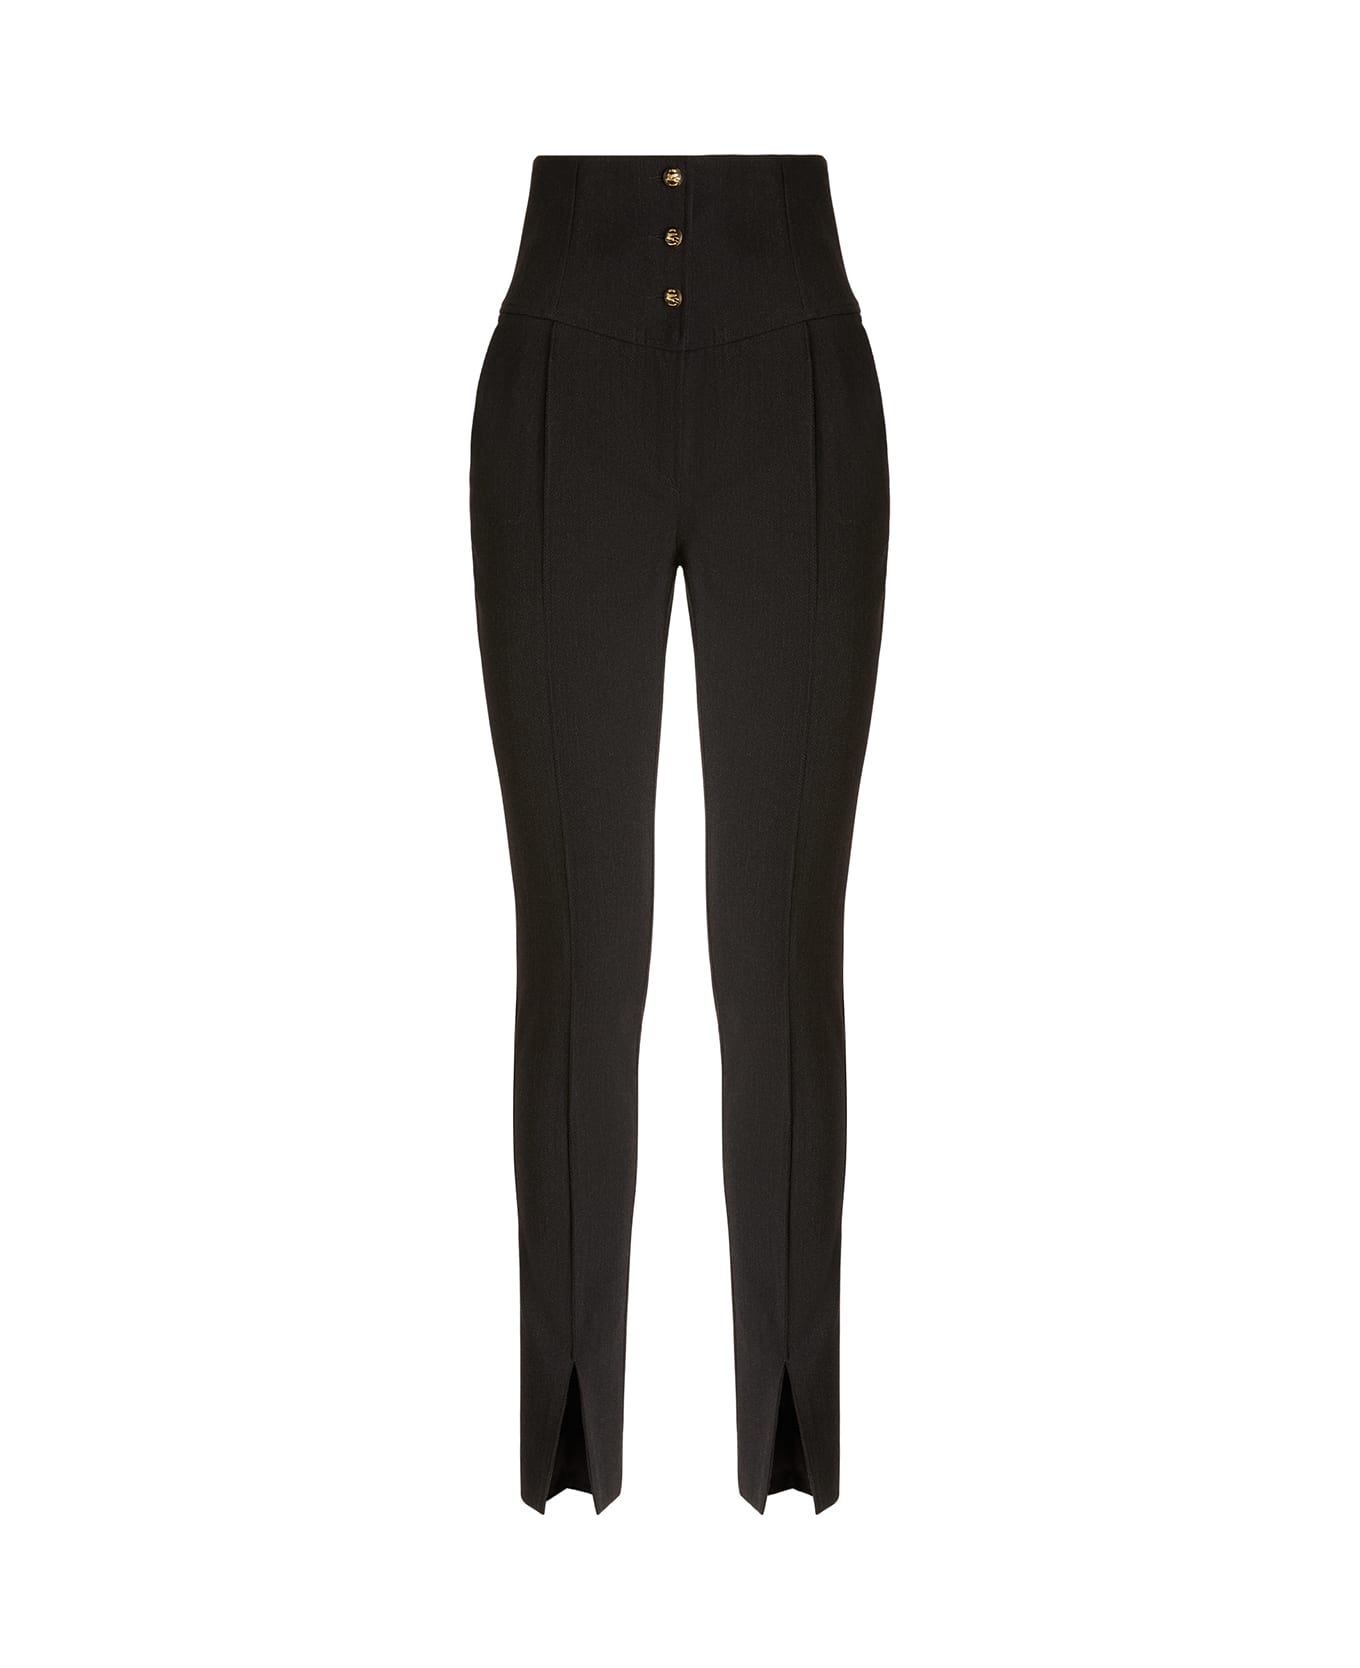 Etro Woman Black High Waist Trousers With Pegasus Buttons - Nero